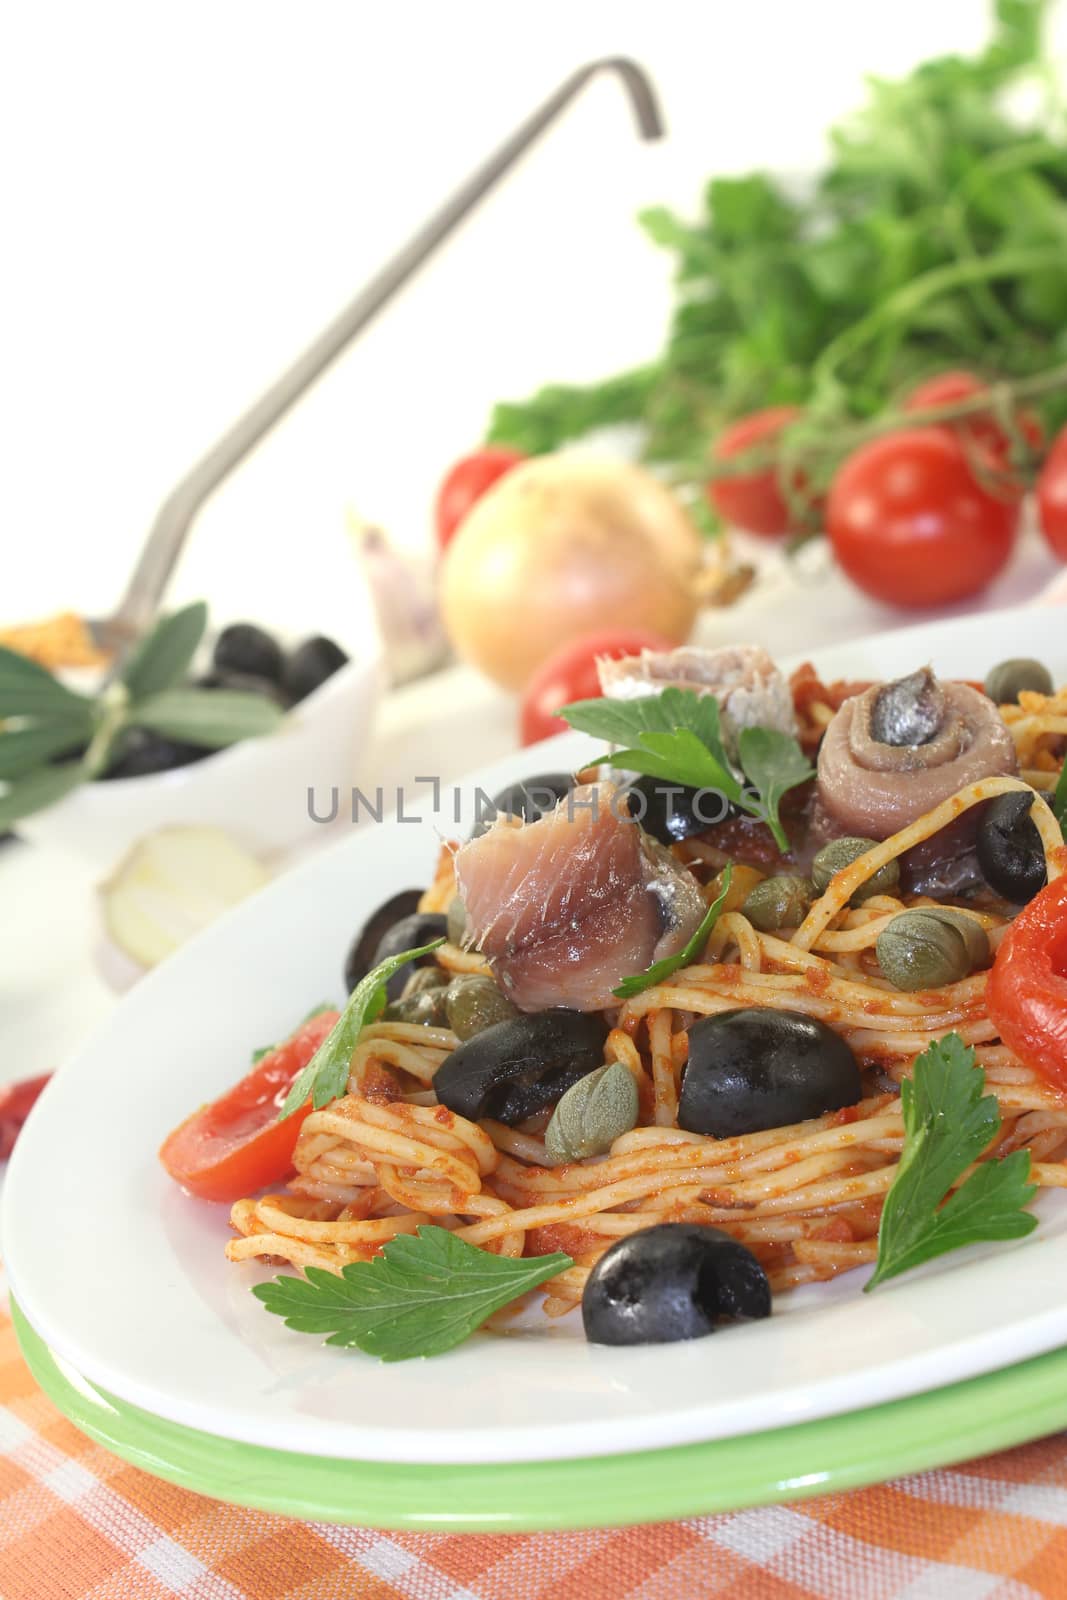 Spaghetti alla puttanesca with olives and anchovies by discovery